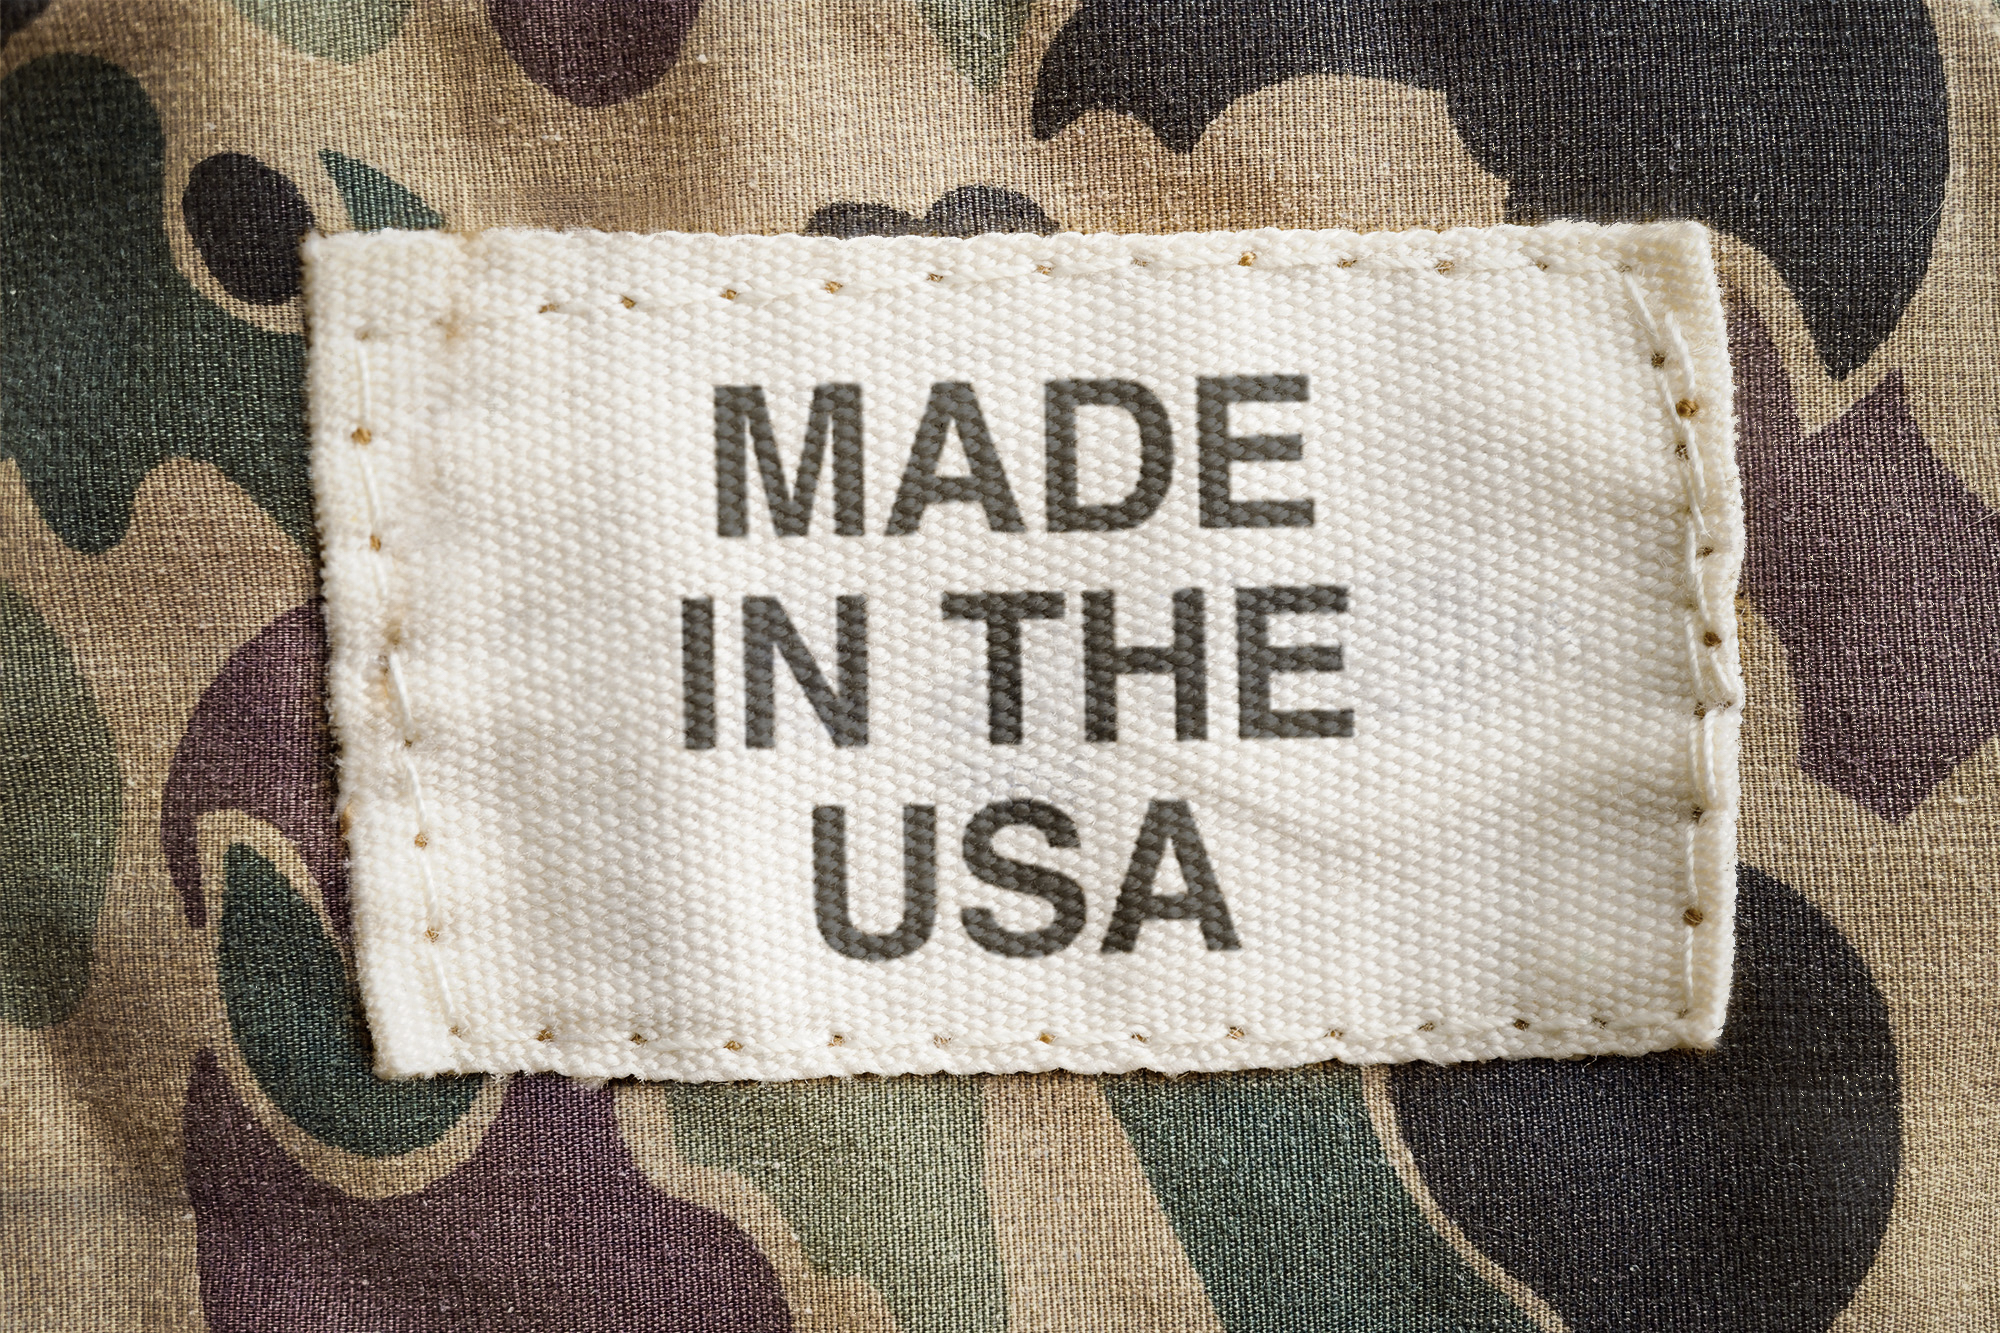 Camo that's made in America.